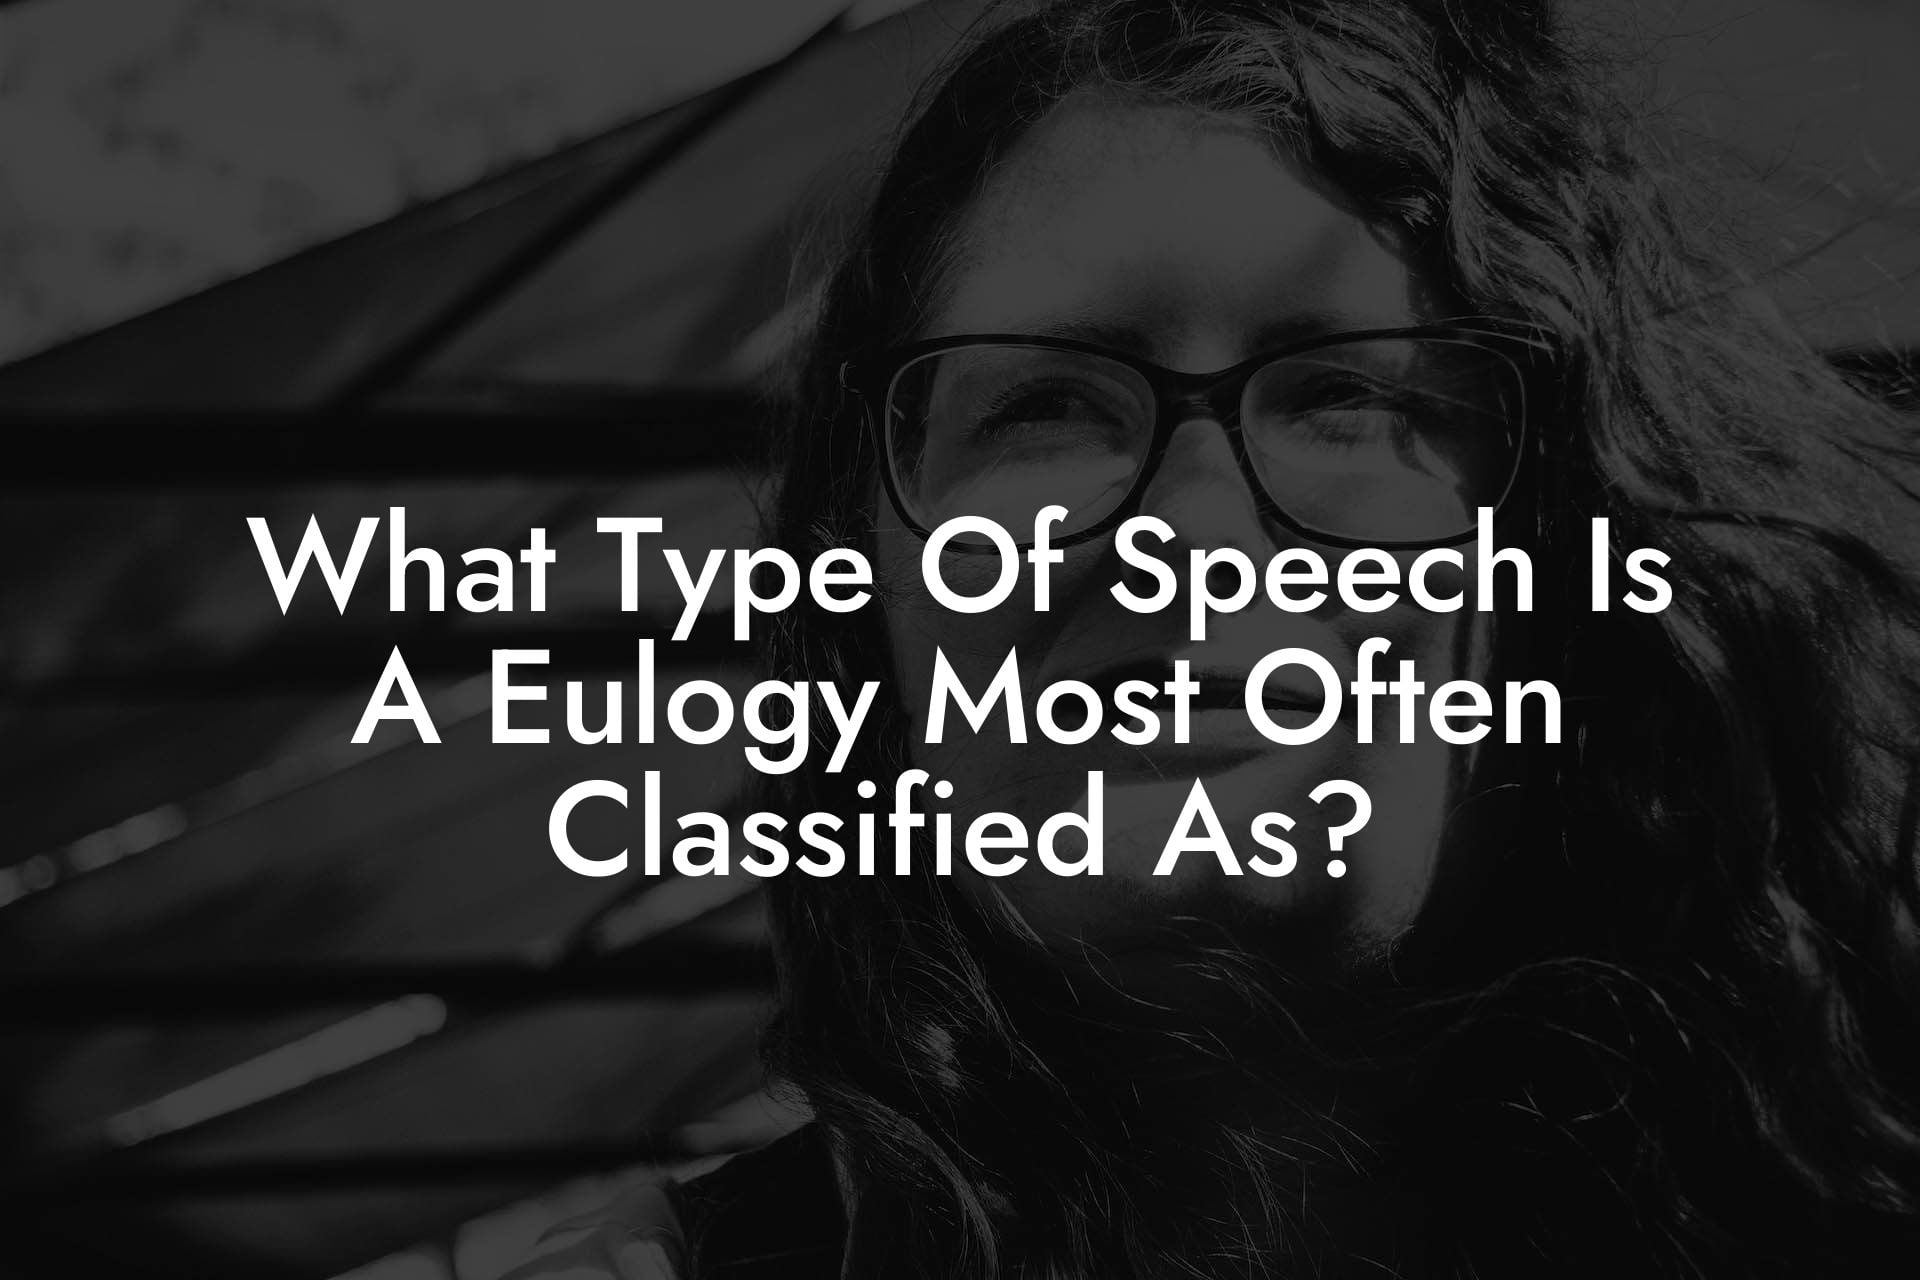 What Type Of Speech Is A Eulogy Most Often Classified As?